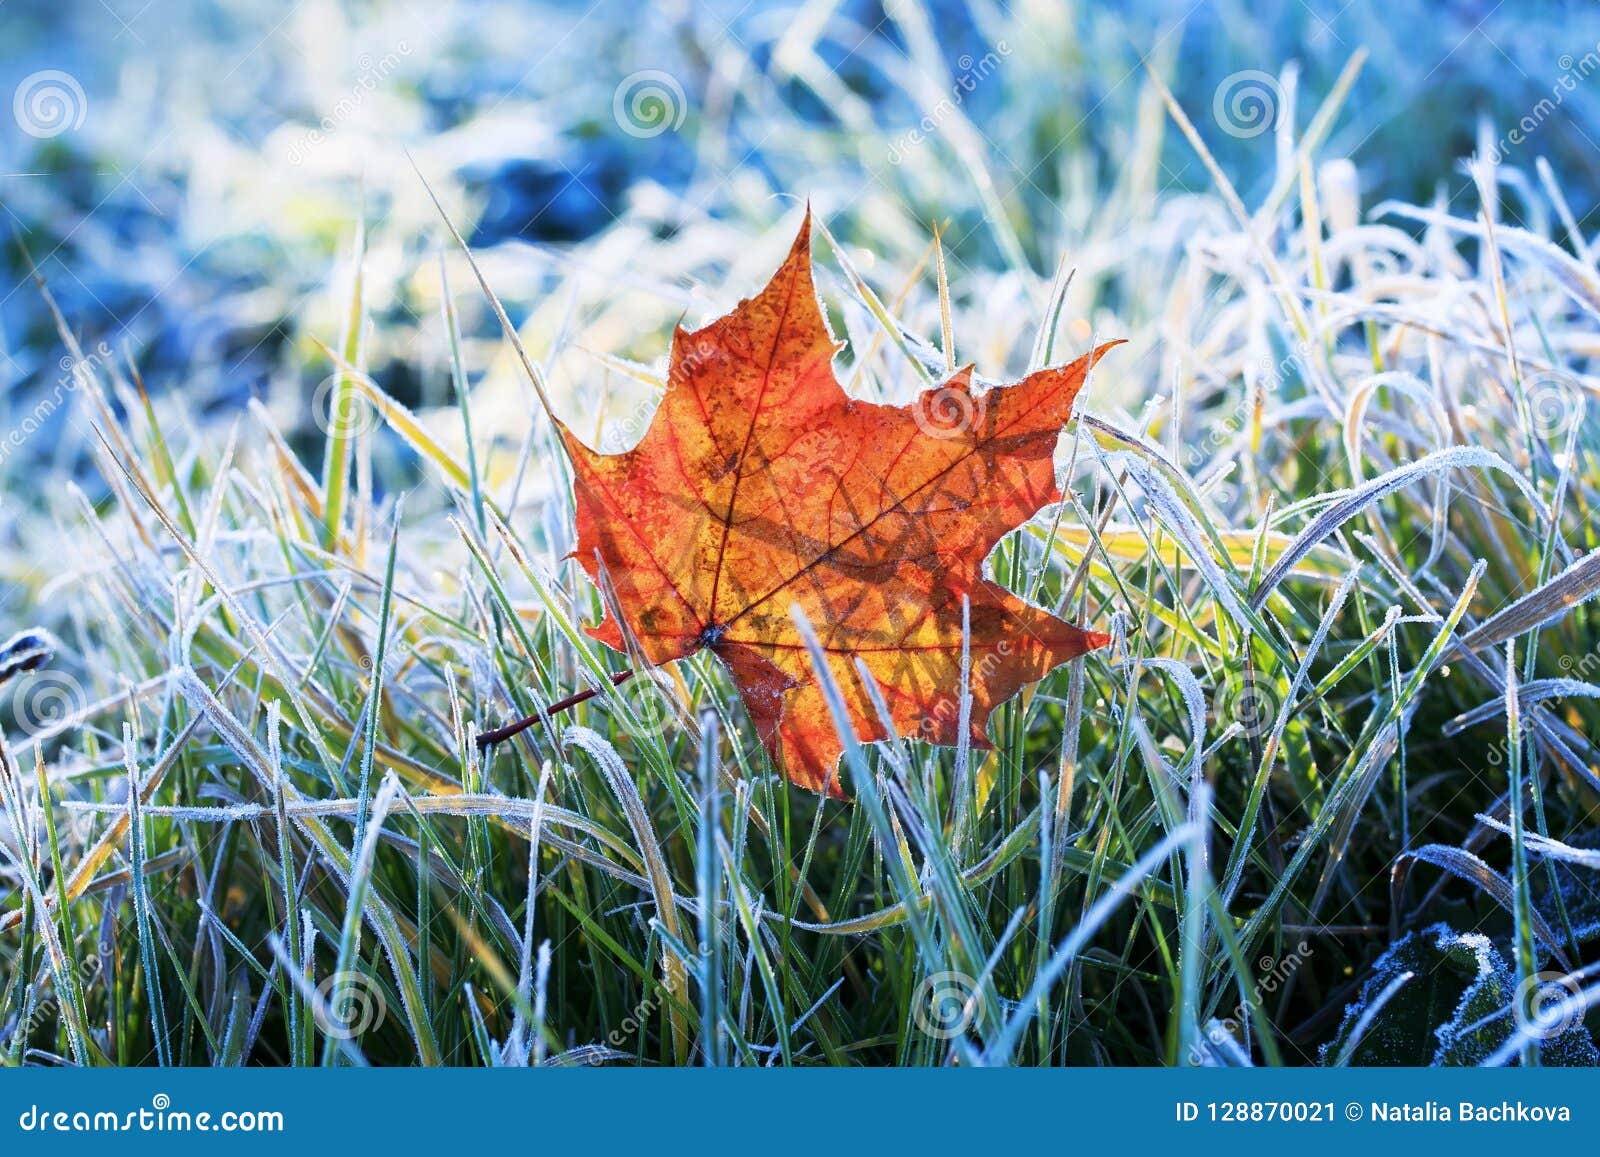 natural background beautiful bright golden maple leaf lies on t